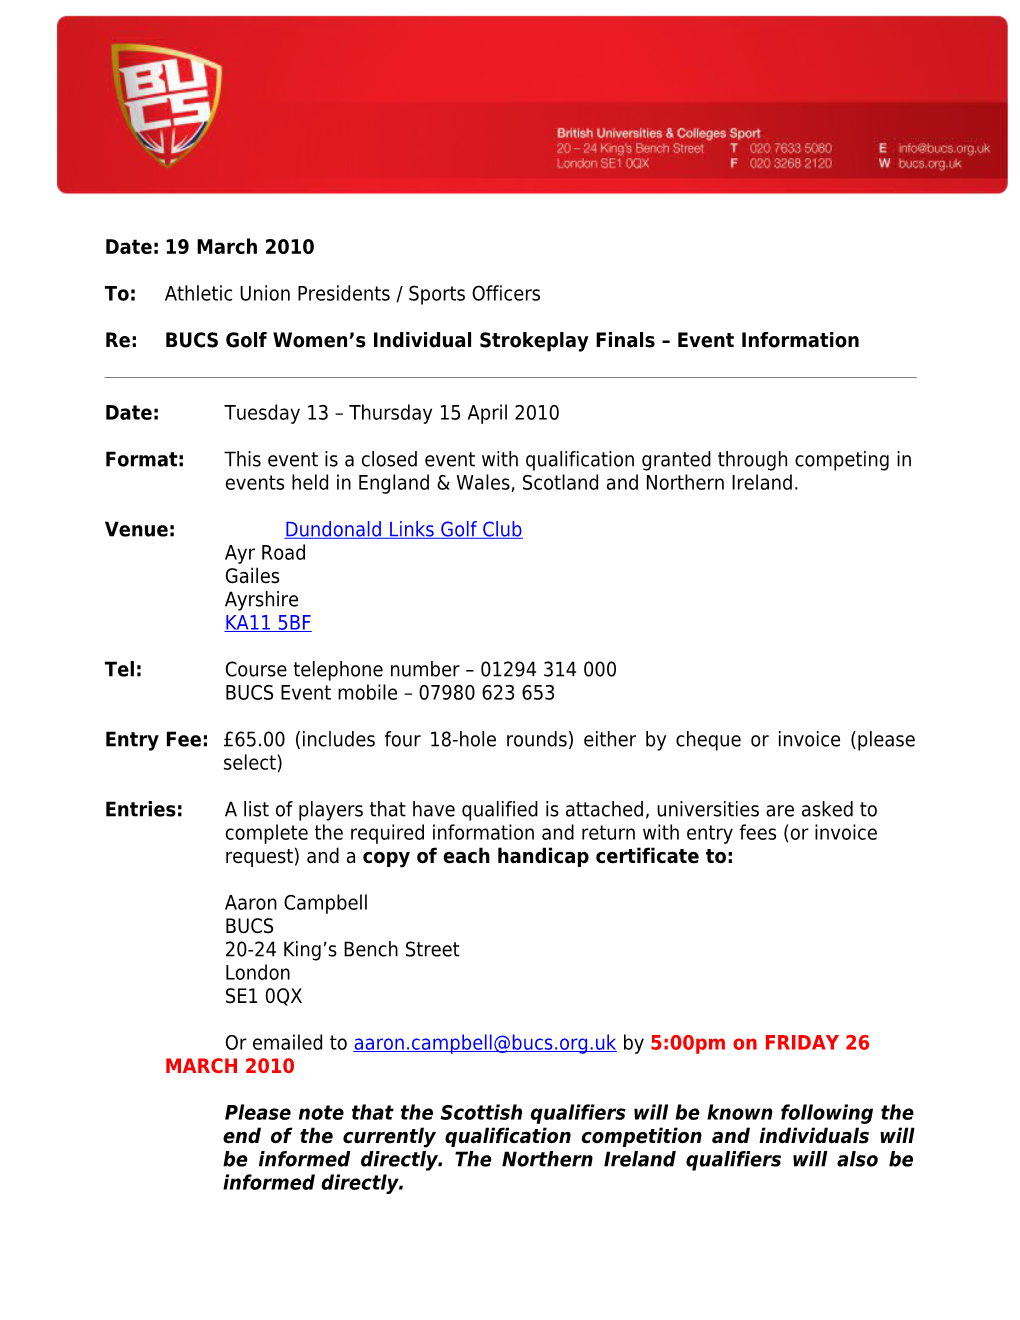 Re:BUCS Golf Women S Individual Strokeplay Finals Event Information